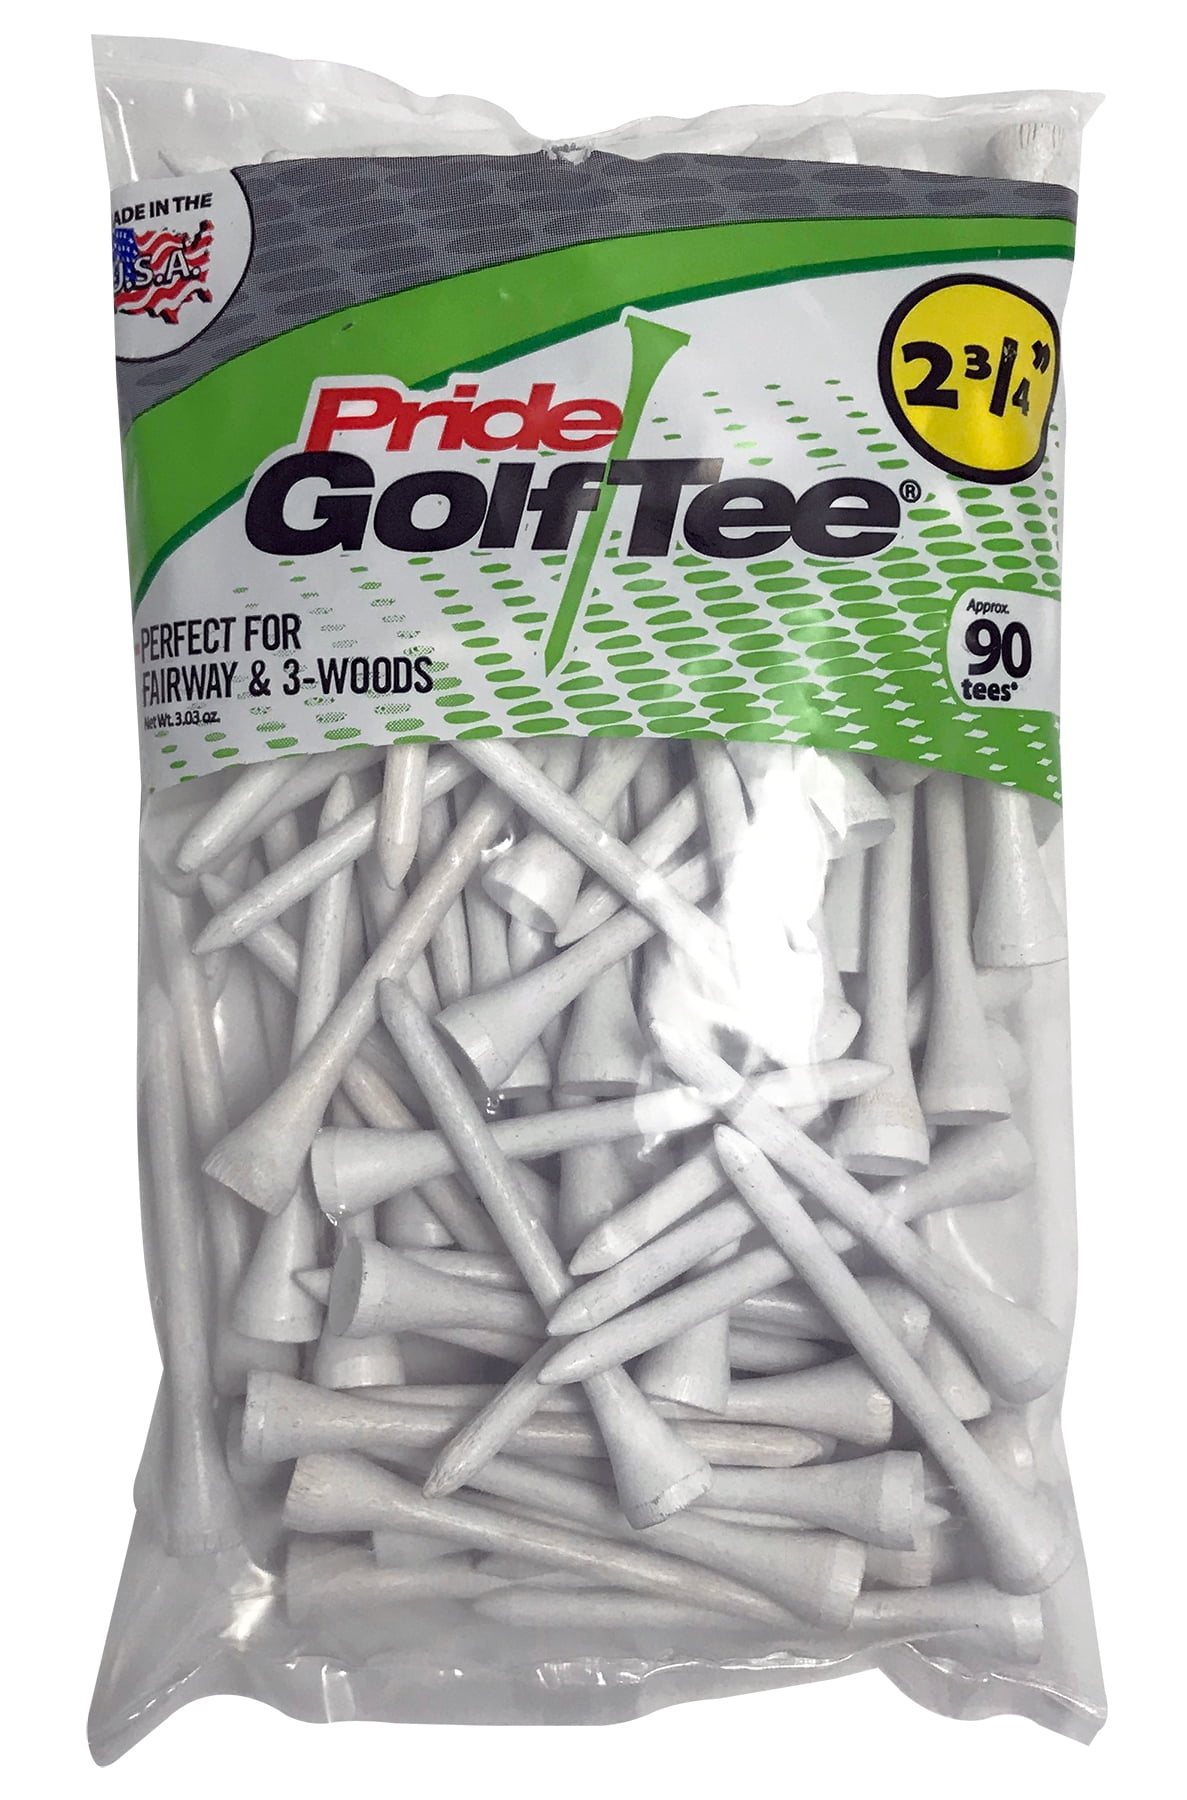 Pride Golf Tee, 2-3/4" White, 90 Count MADE IN USA